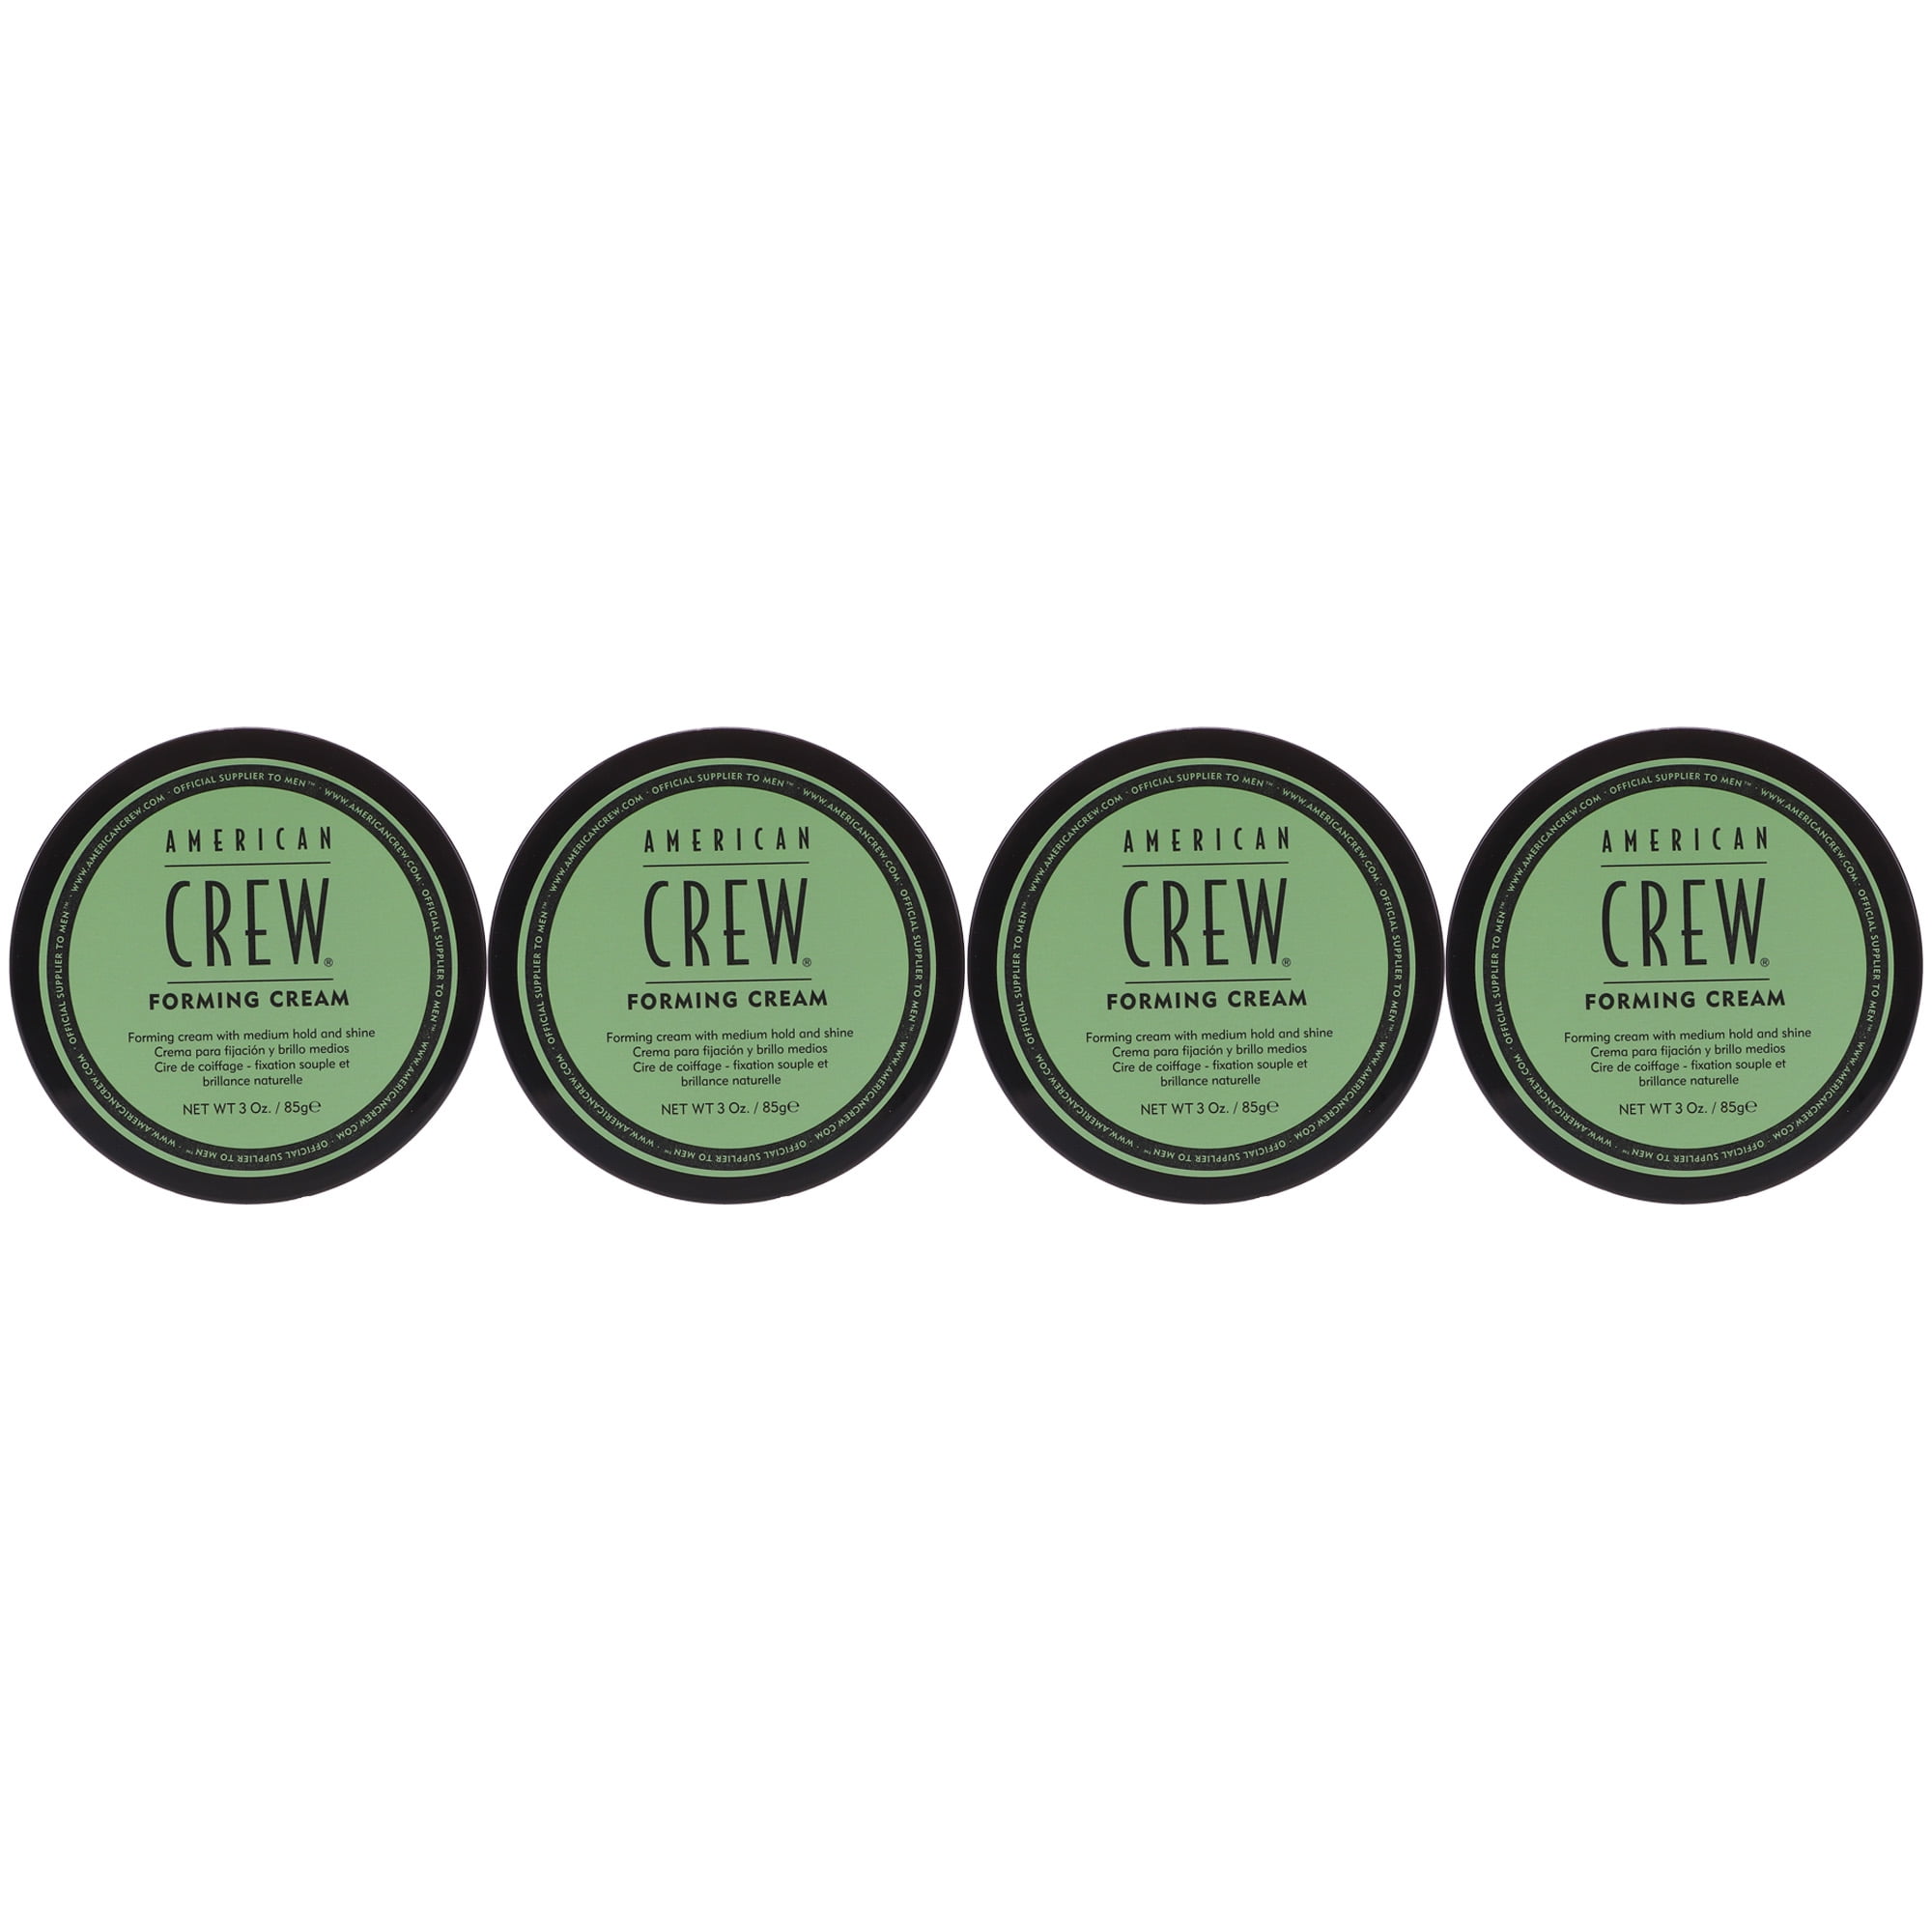 American Crew Thickening Hair Styling & Forming Cream, 3 oz, 4 Piece -  